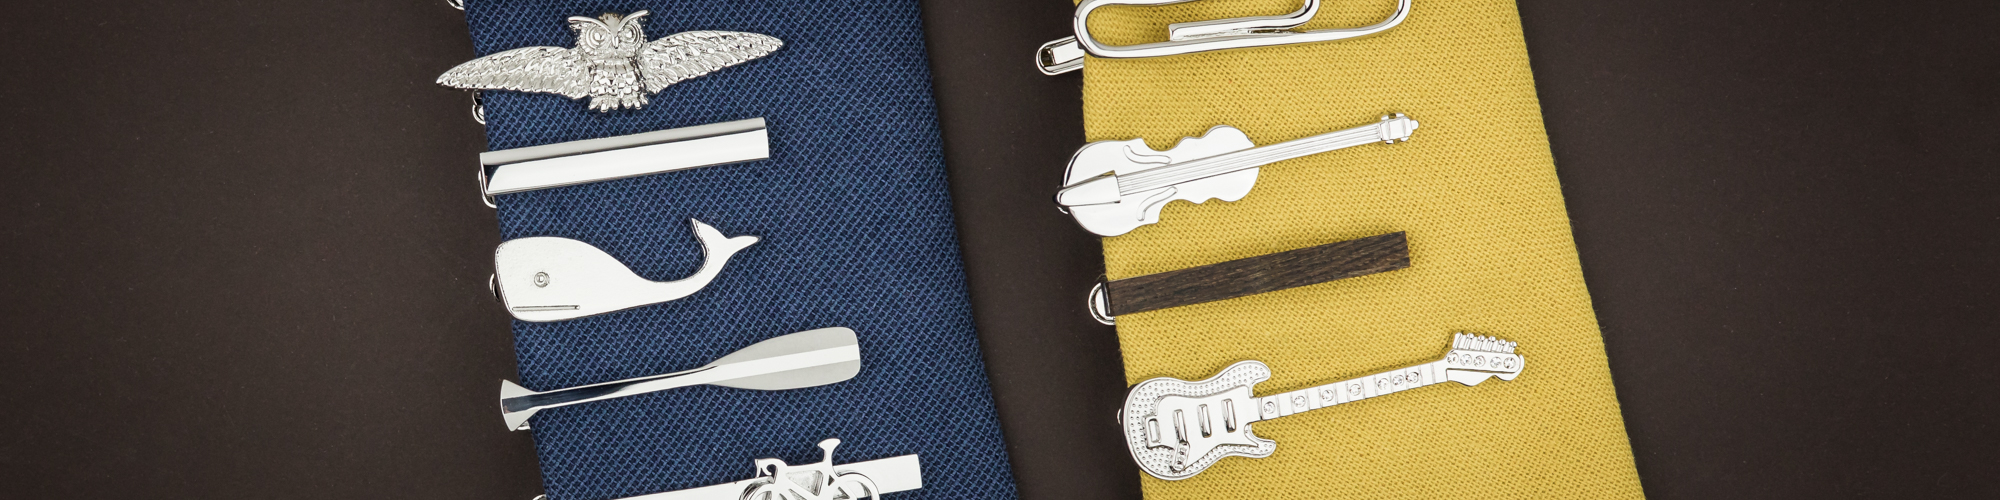 Tie bars and tie clips